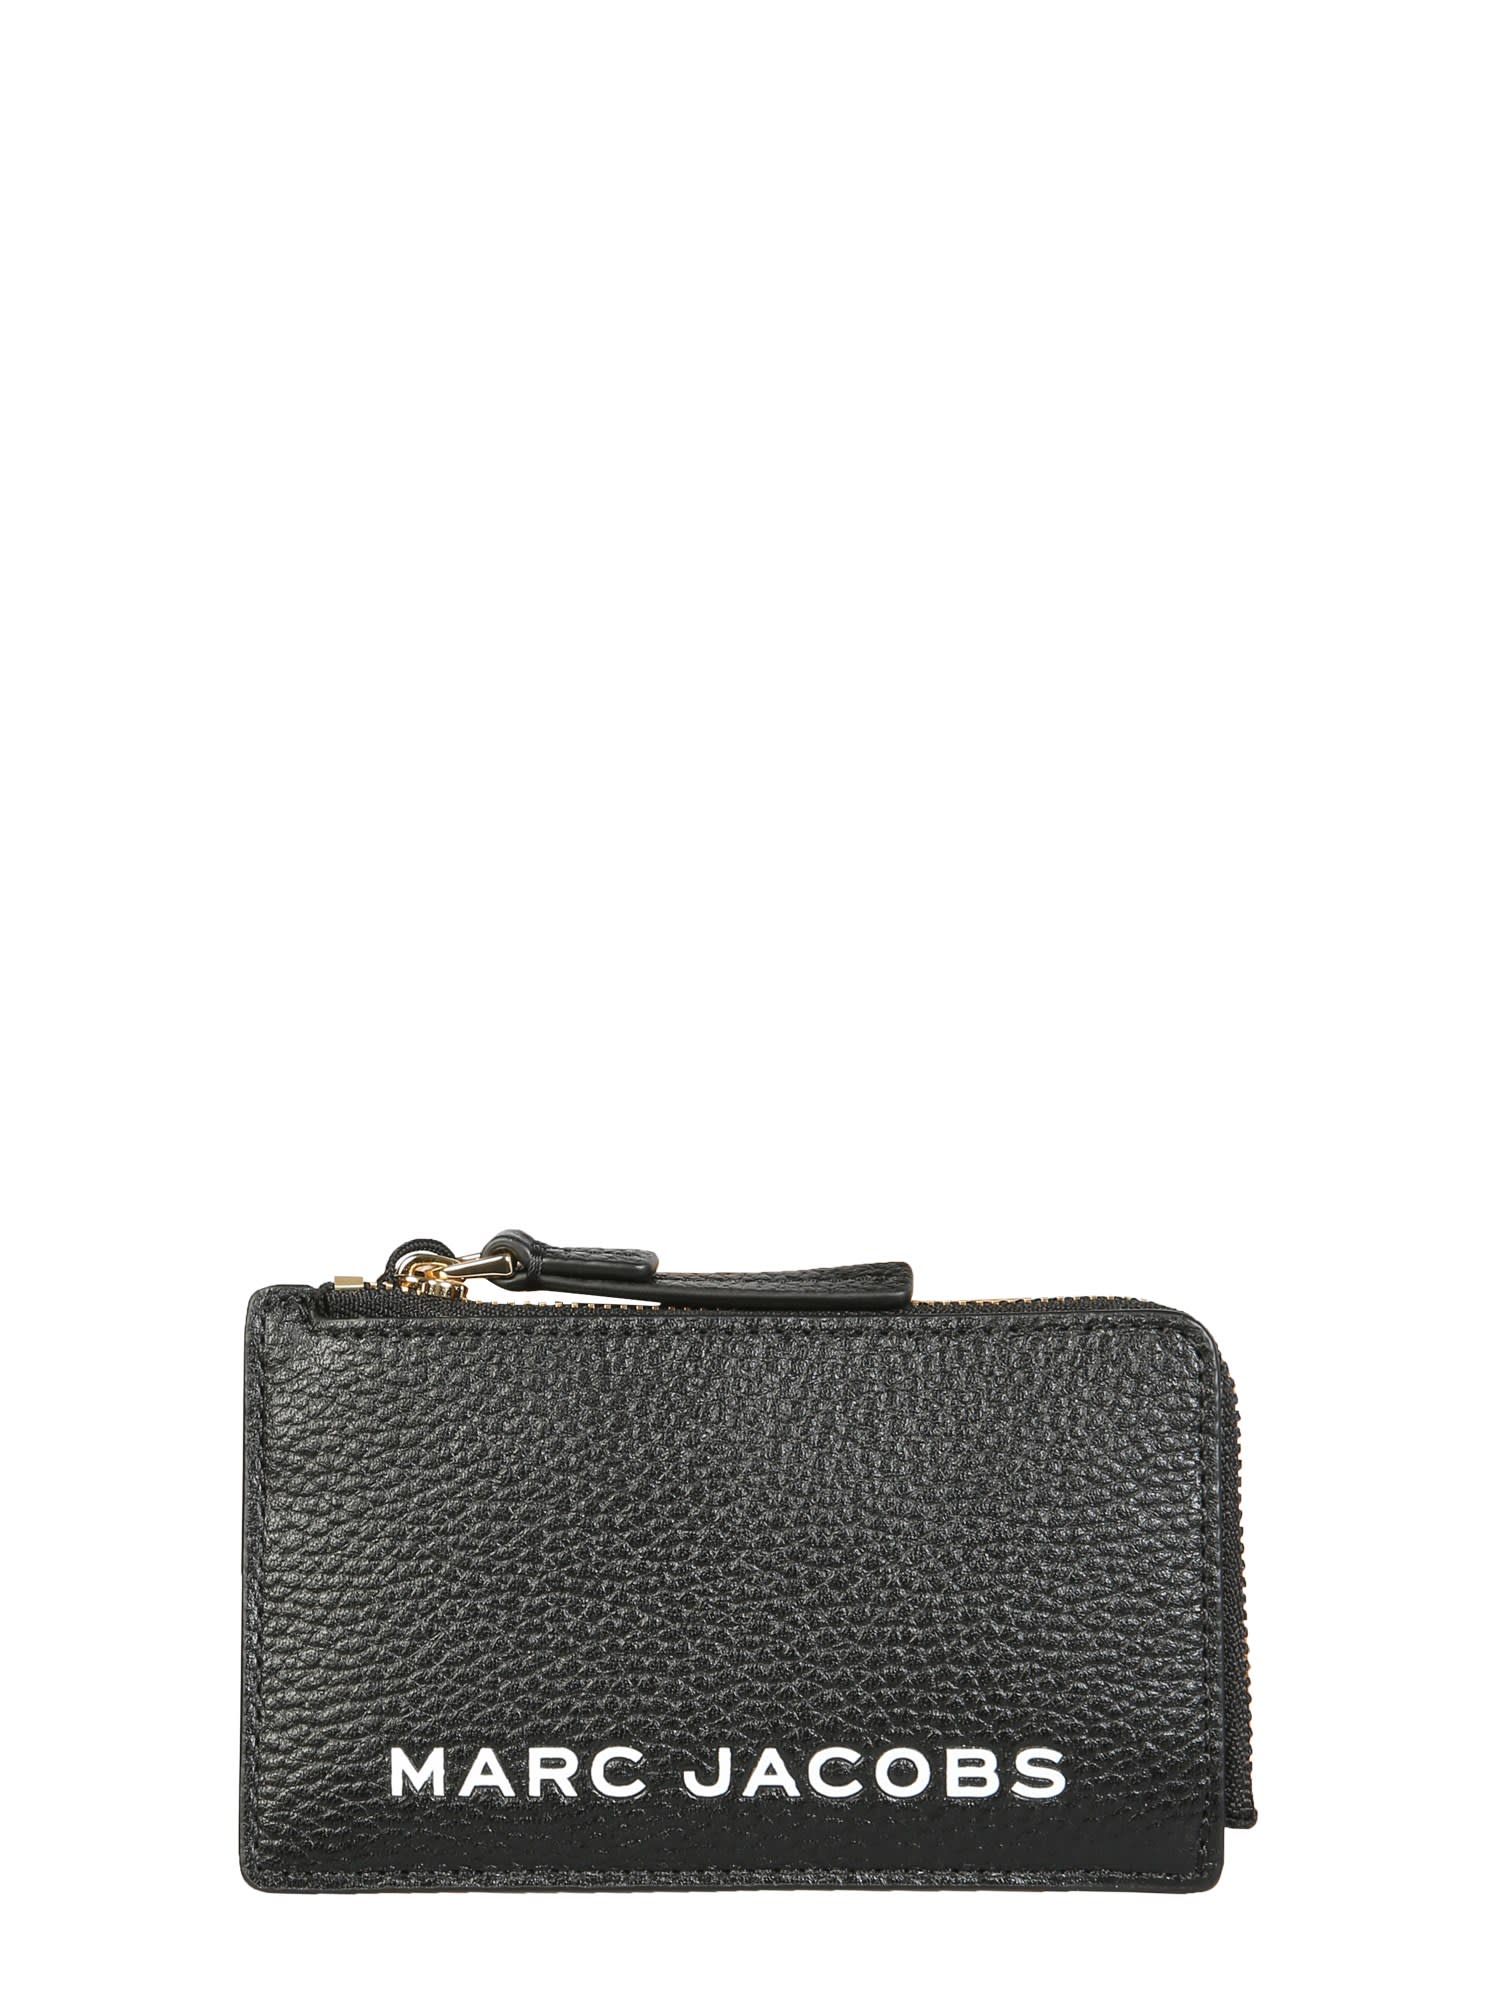 Marc Jacobs The Bold Small Top Zip Wallet